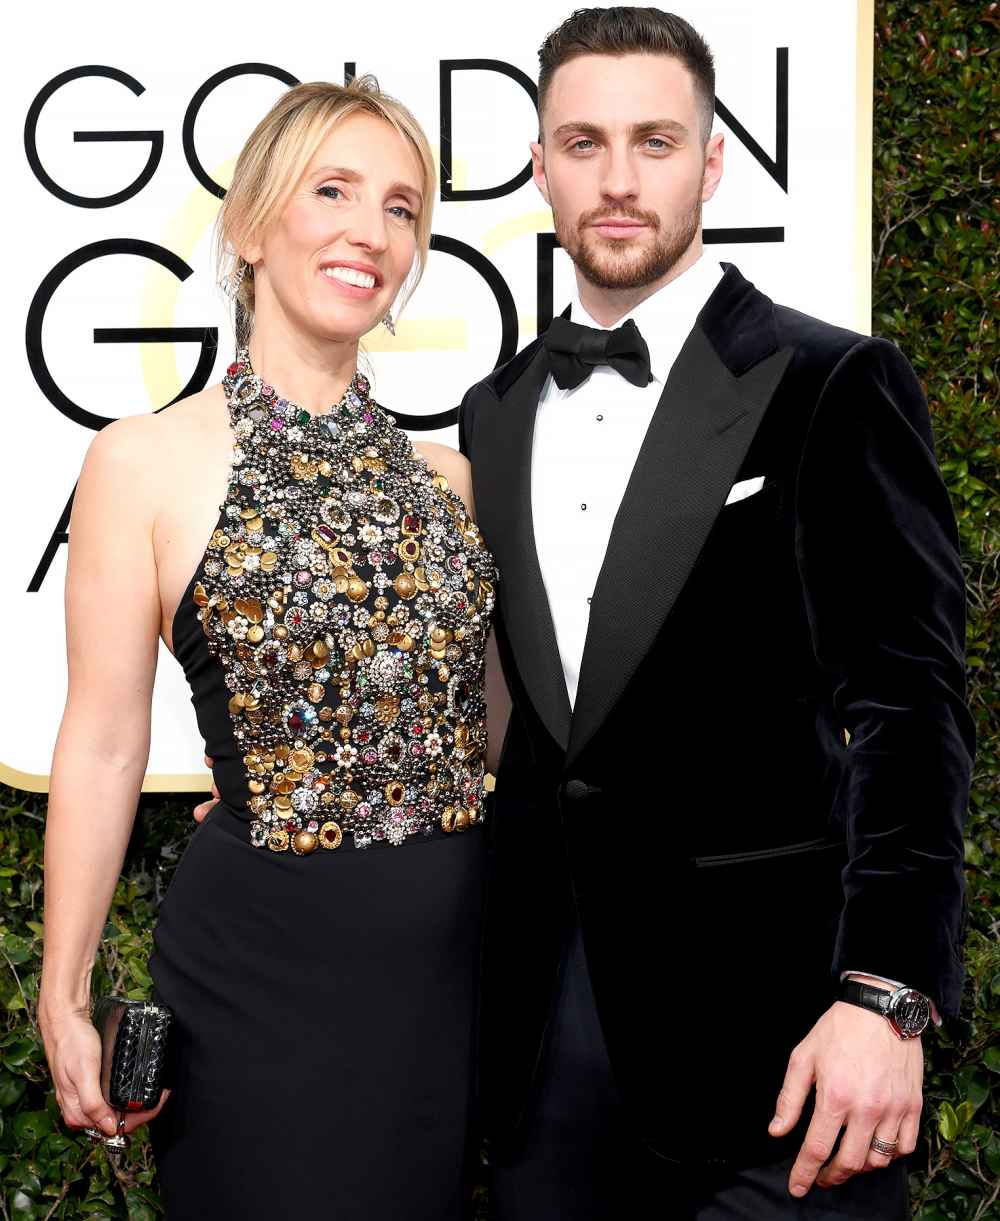 Sam Taylor-Johnson and Aaron Taylor-Johnson arrive to the 74th Annual Golden Globe Awards.